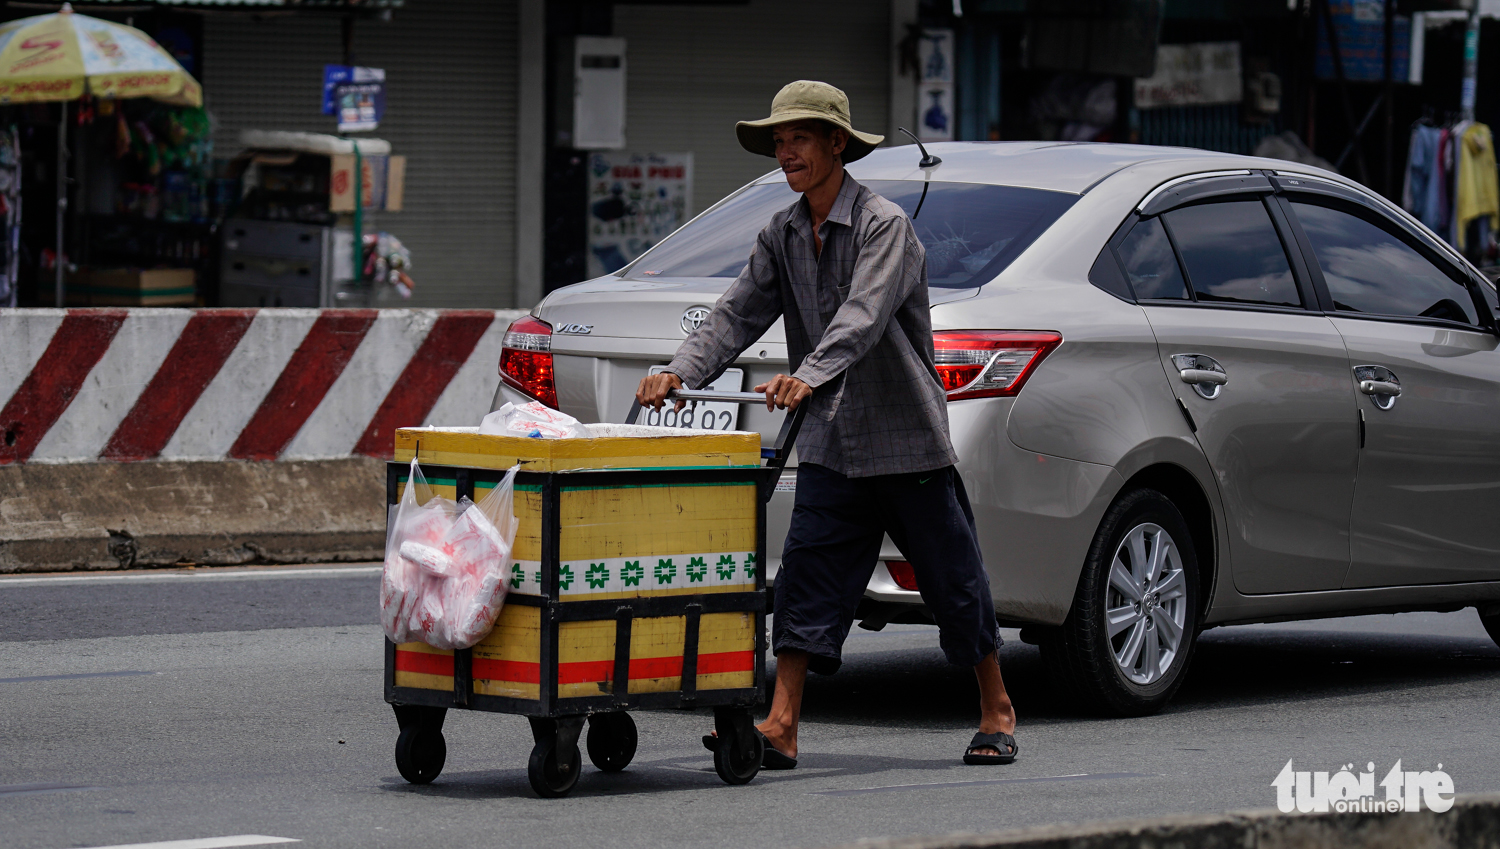 A seller pushes his cart through the middle of the street. Photo: Tuoi Tre